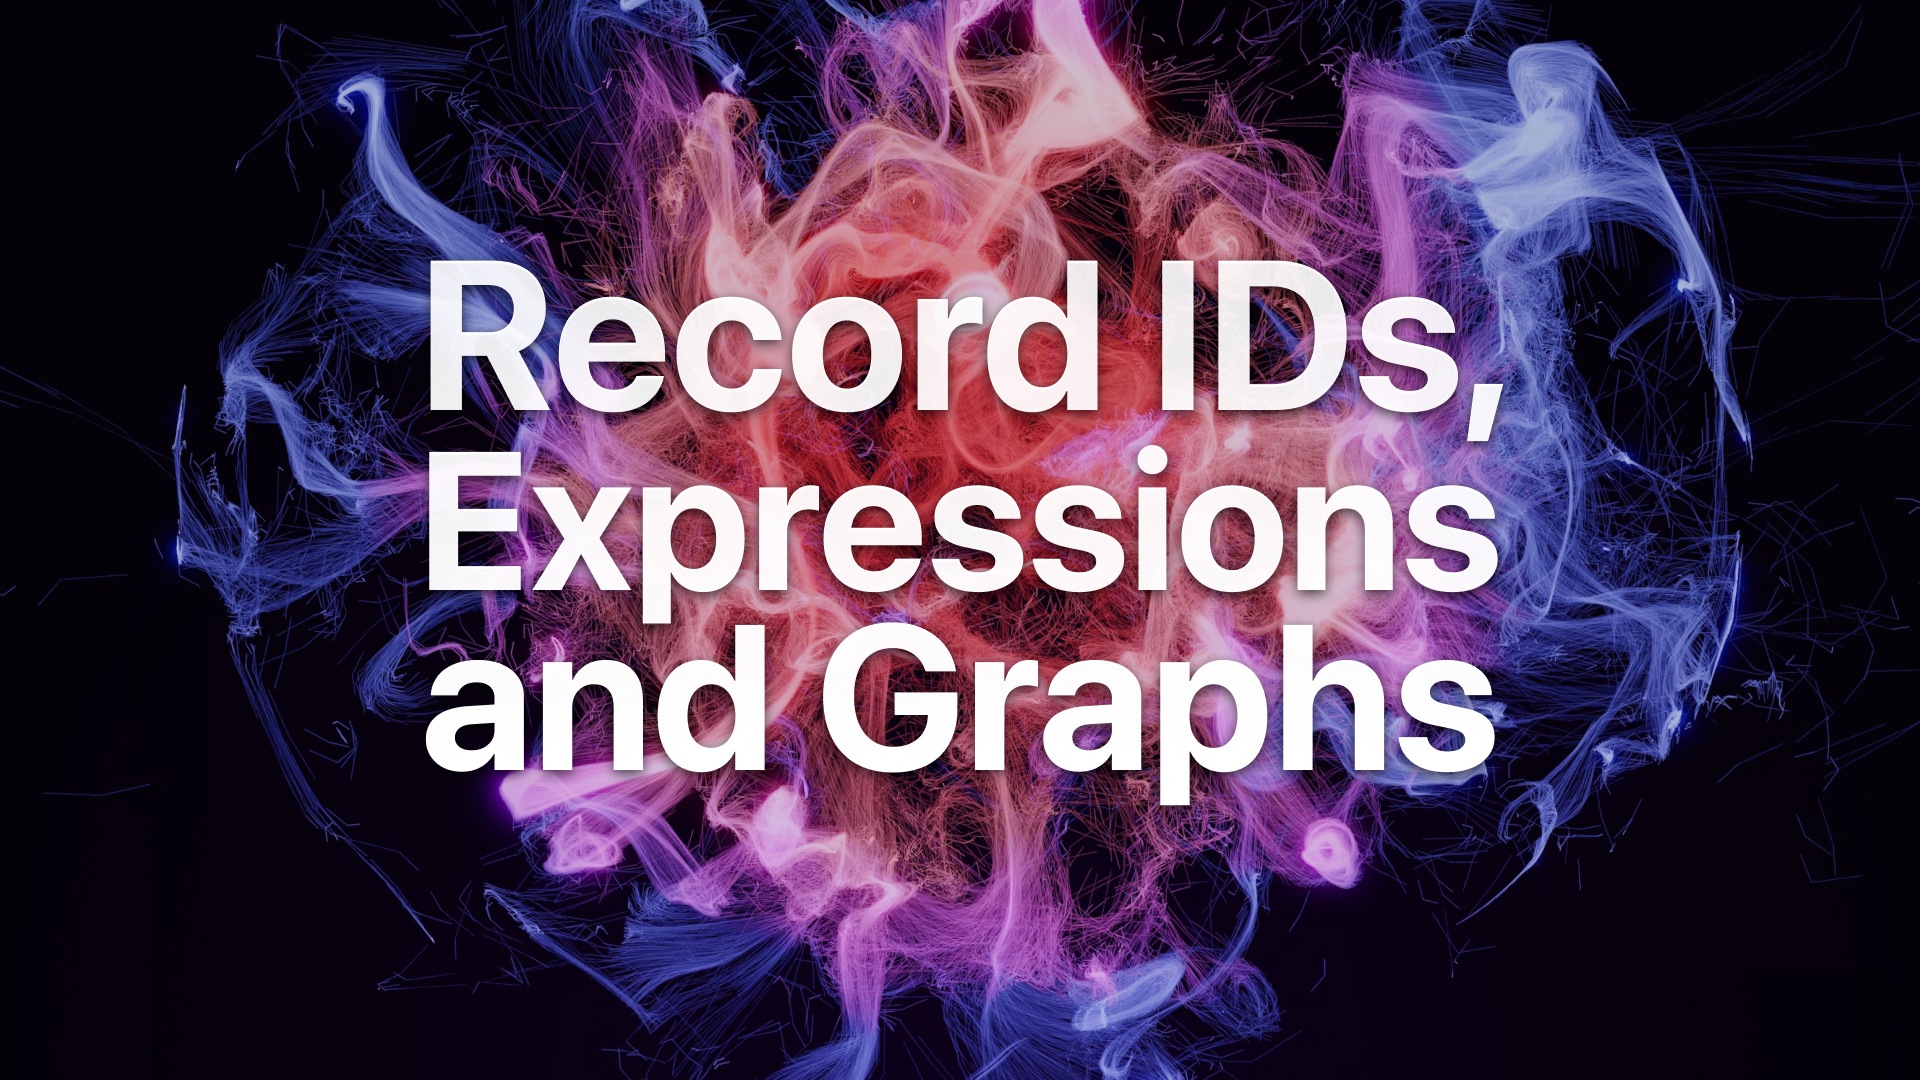 Record IDs, Expressions and Graphs